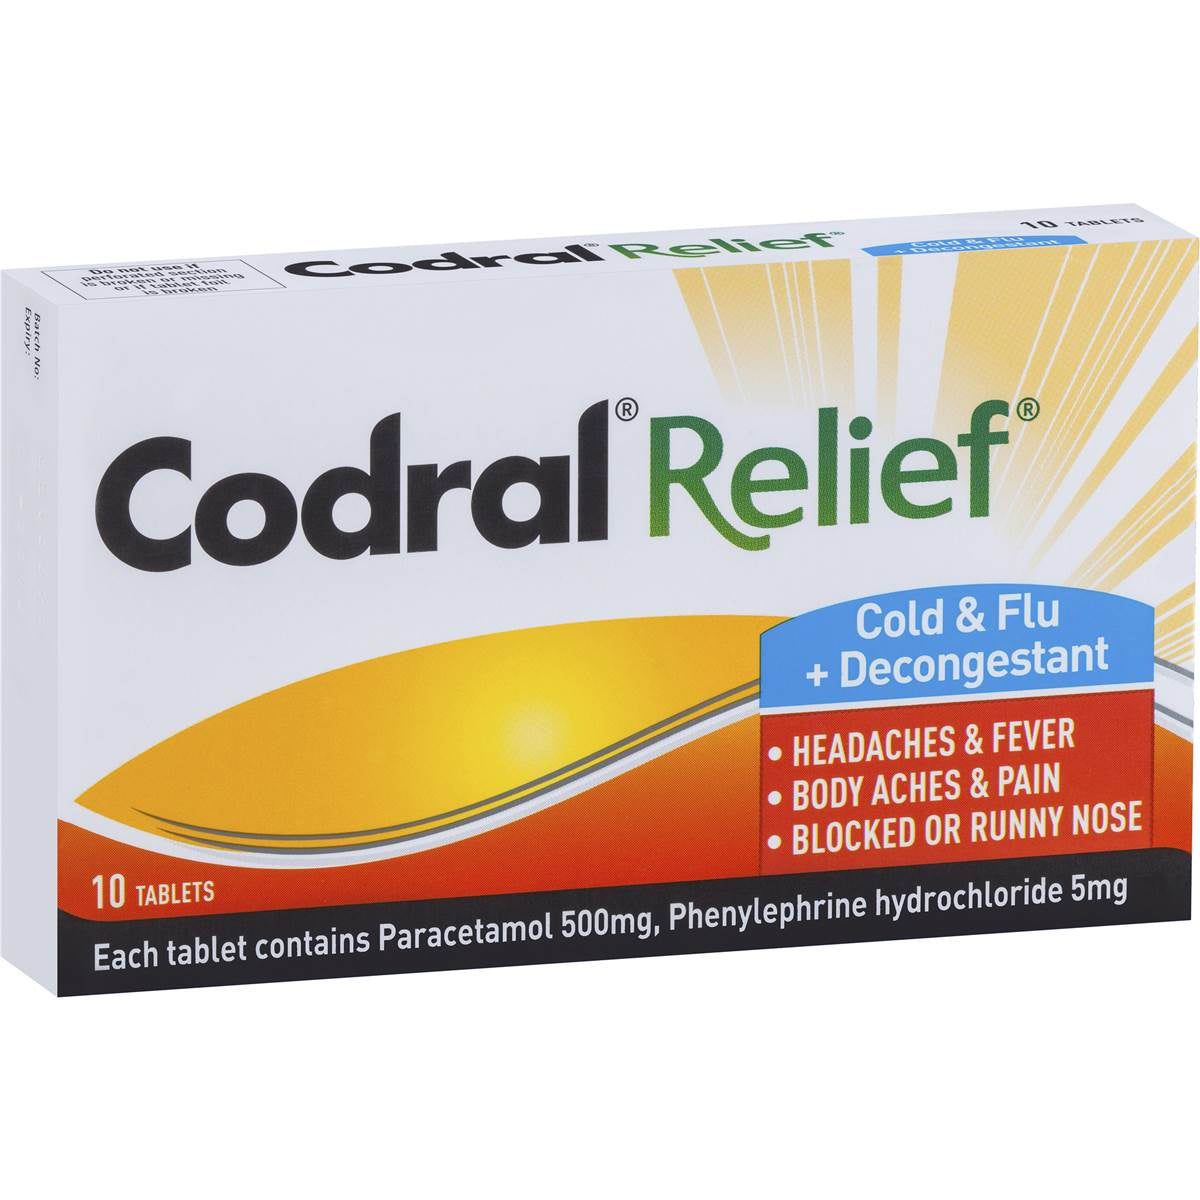 Codral Relief Cold & Flu Tab 10pk